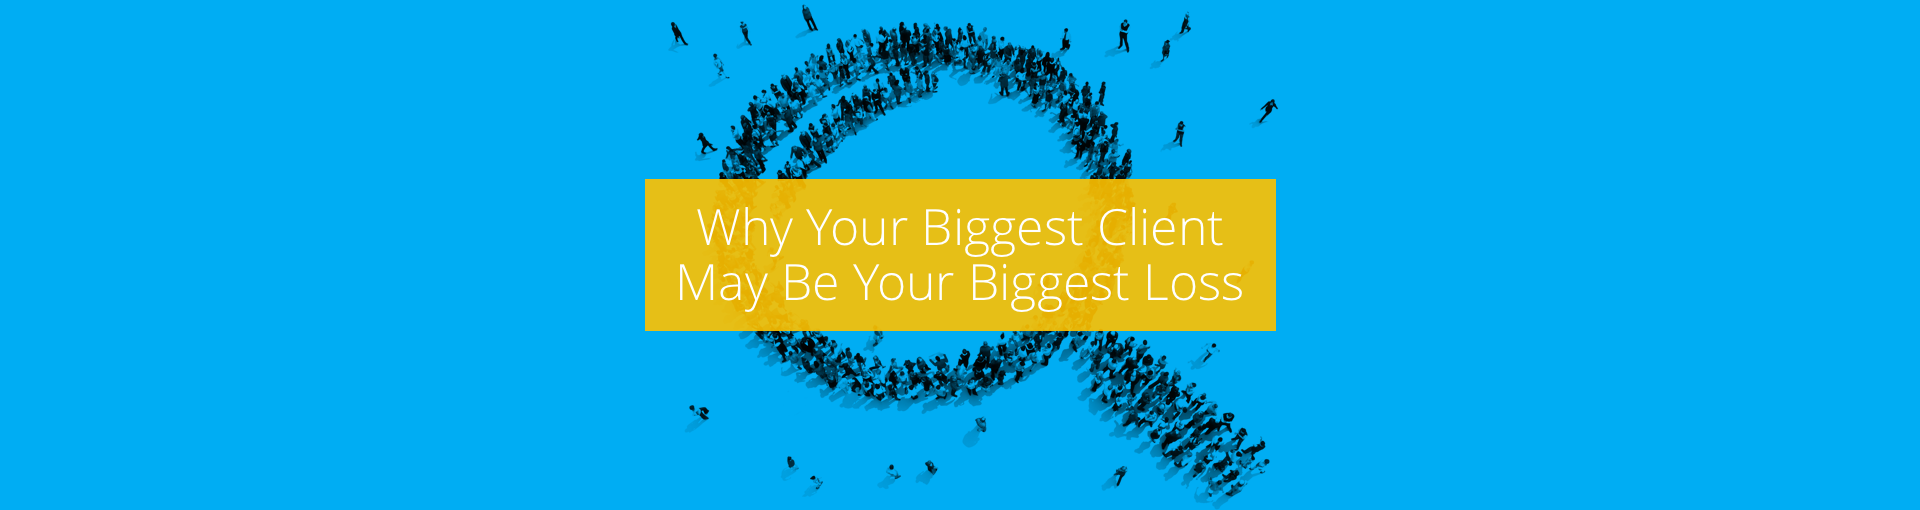 Why Your Biggest Client May Be Your Biggest Loss Featured Image